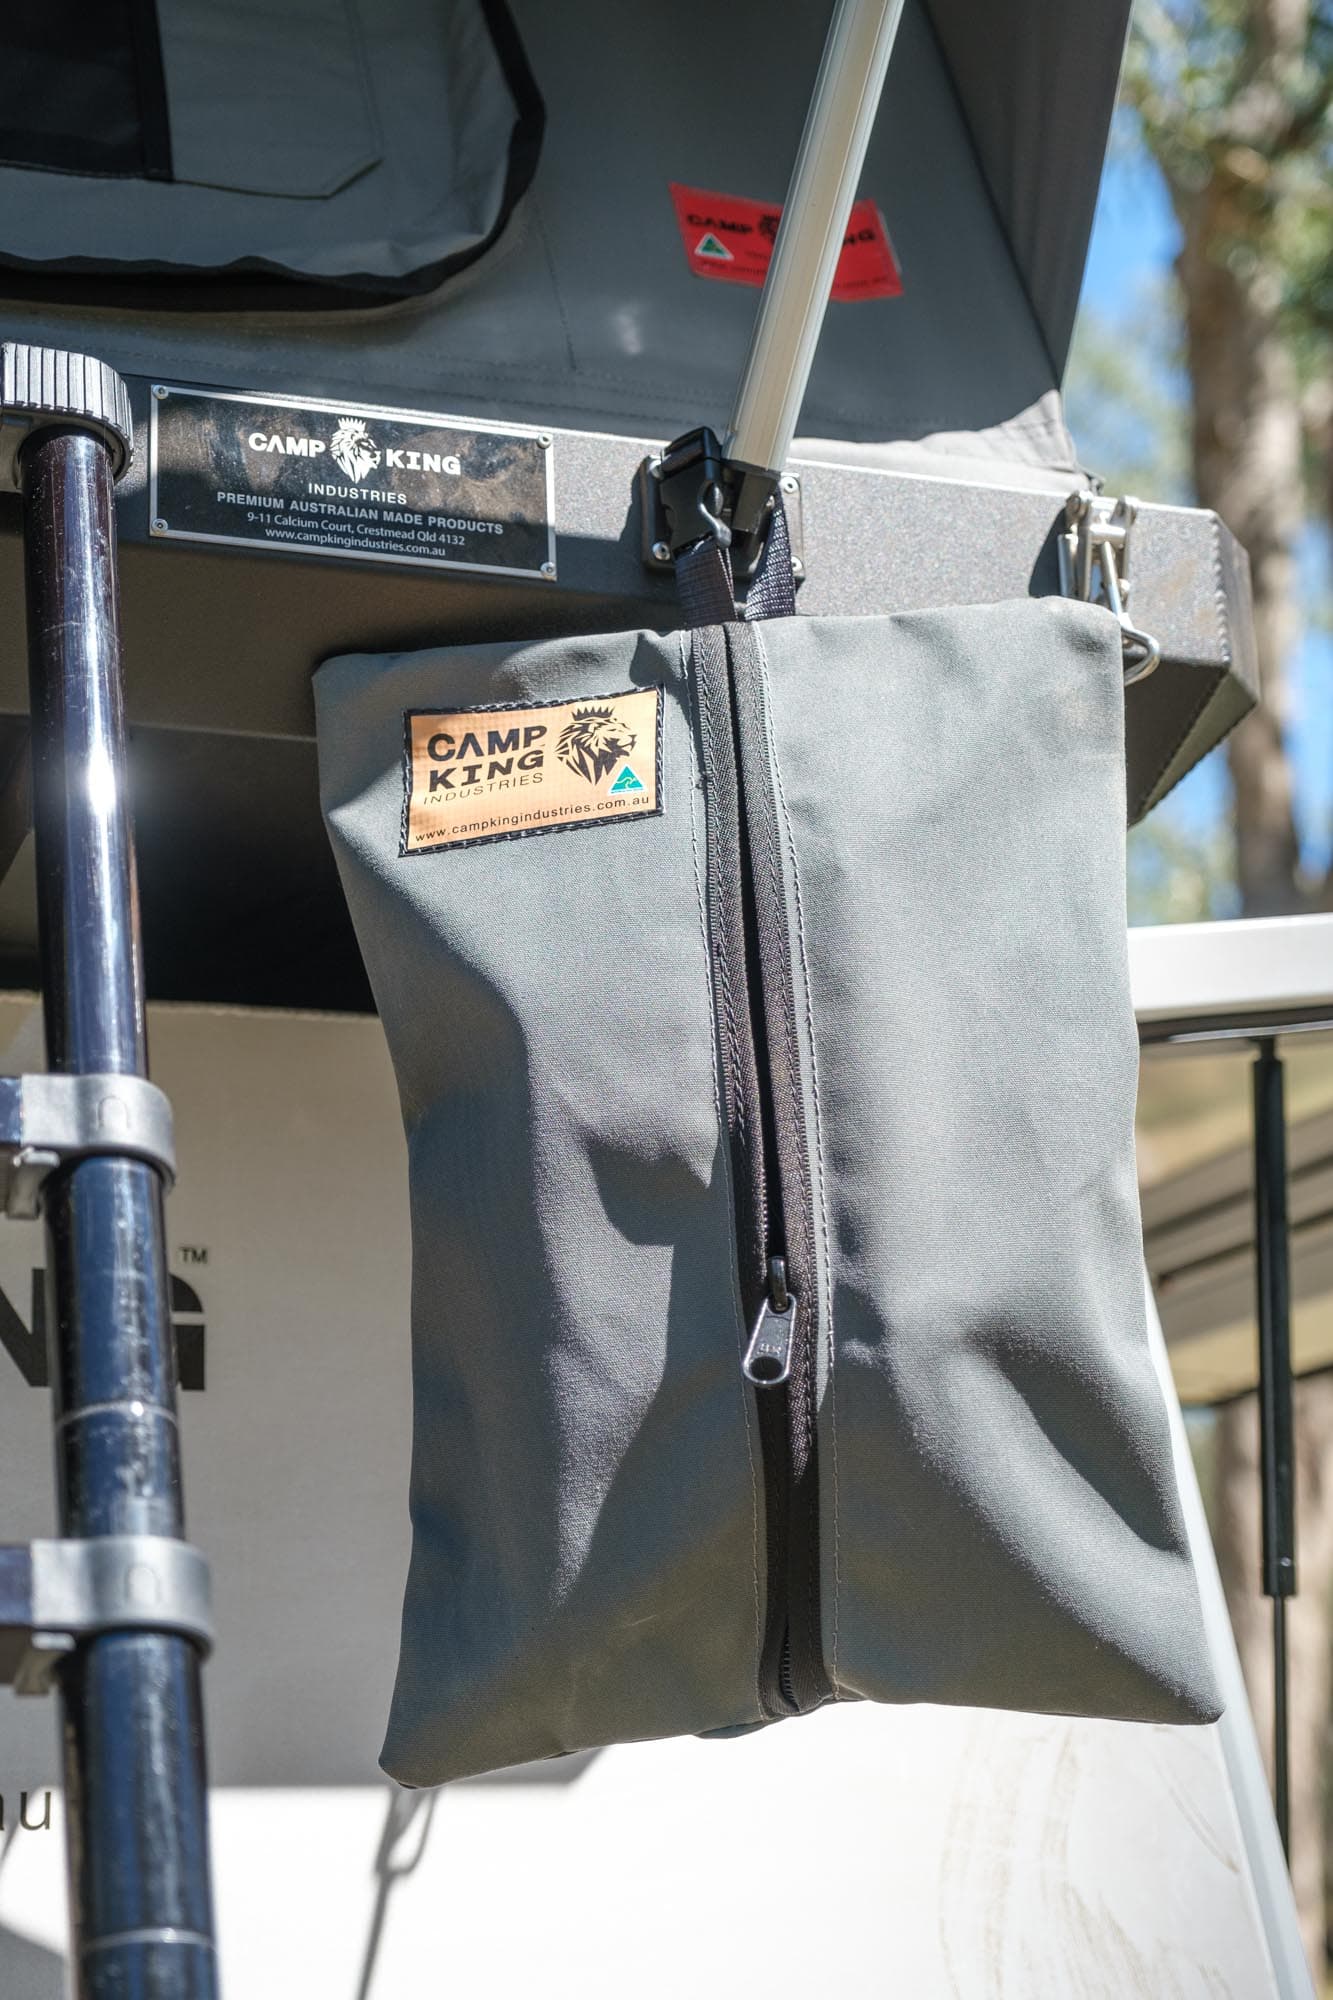 Camp King Canvas Shoe Bags - King Industries